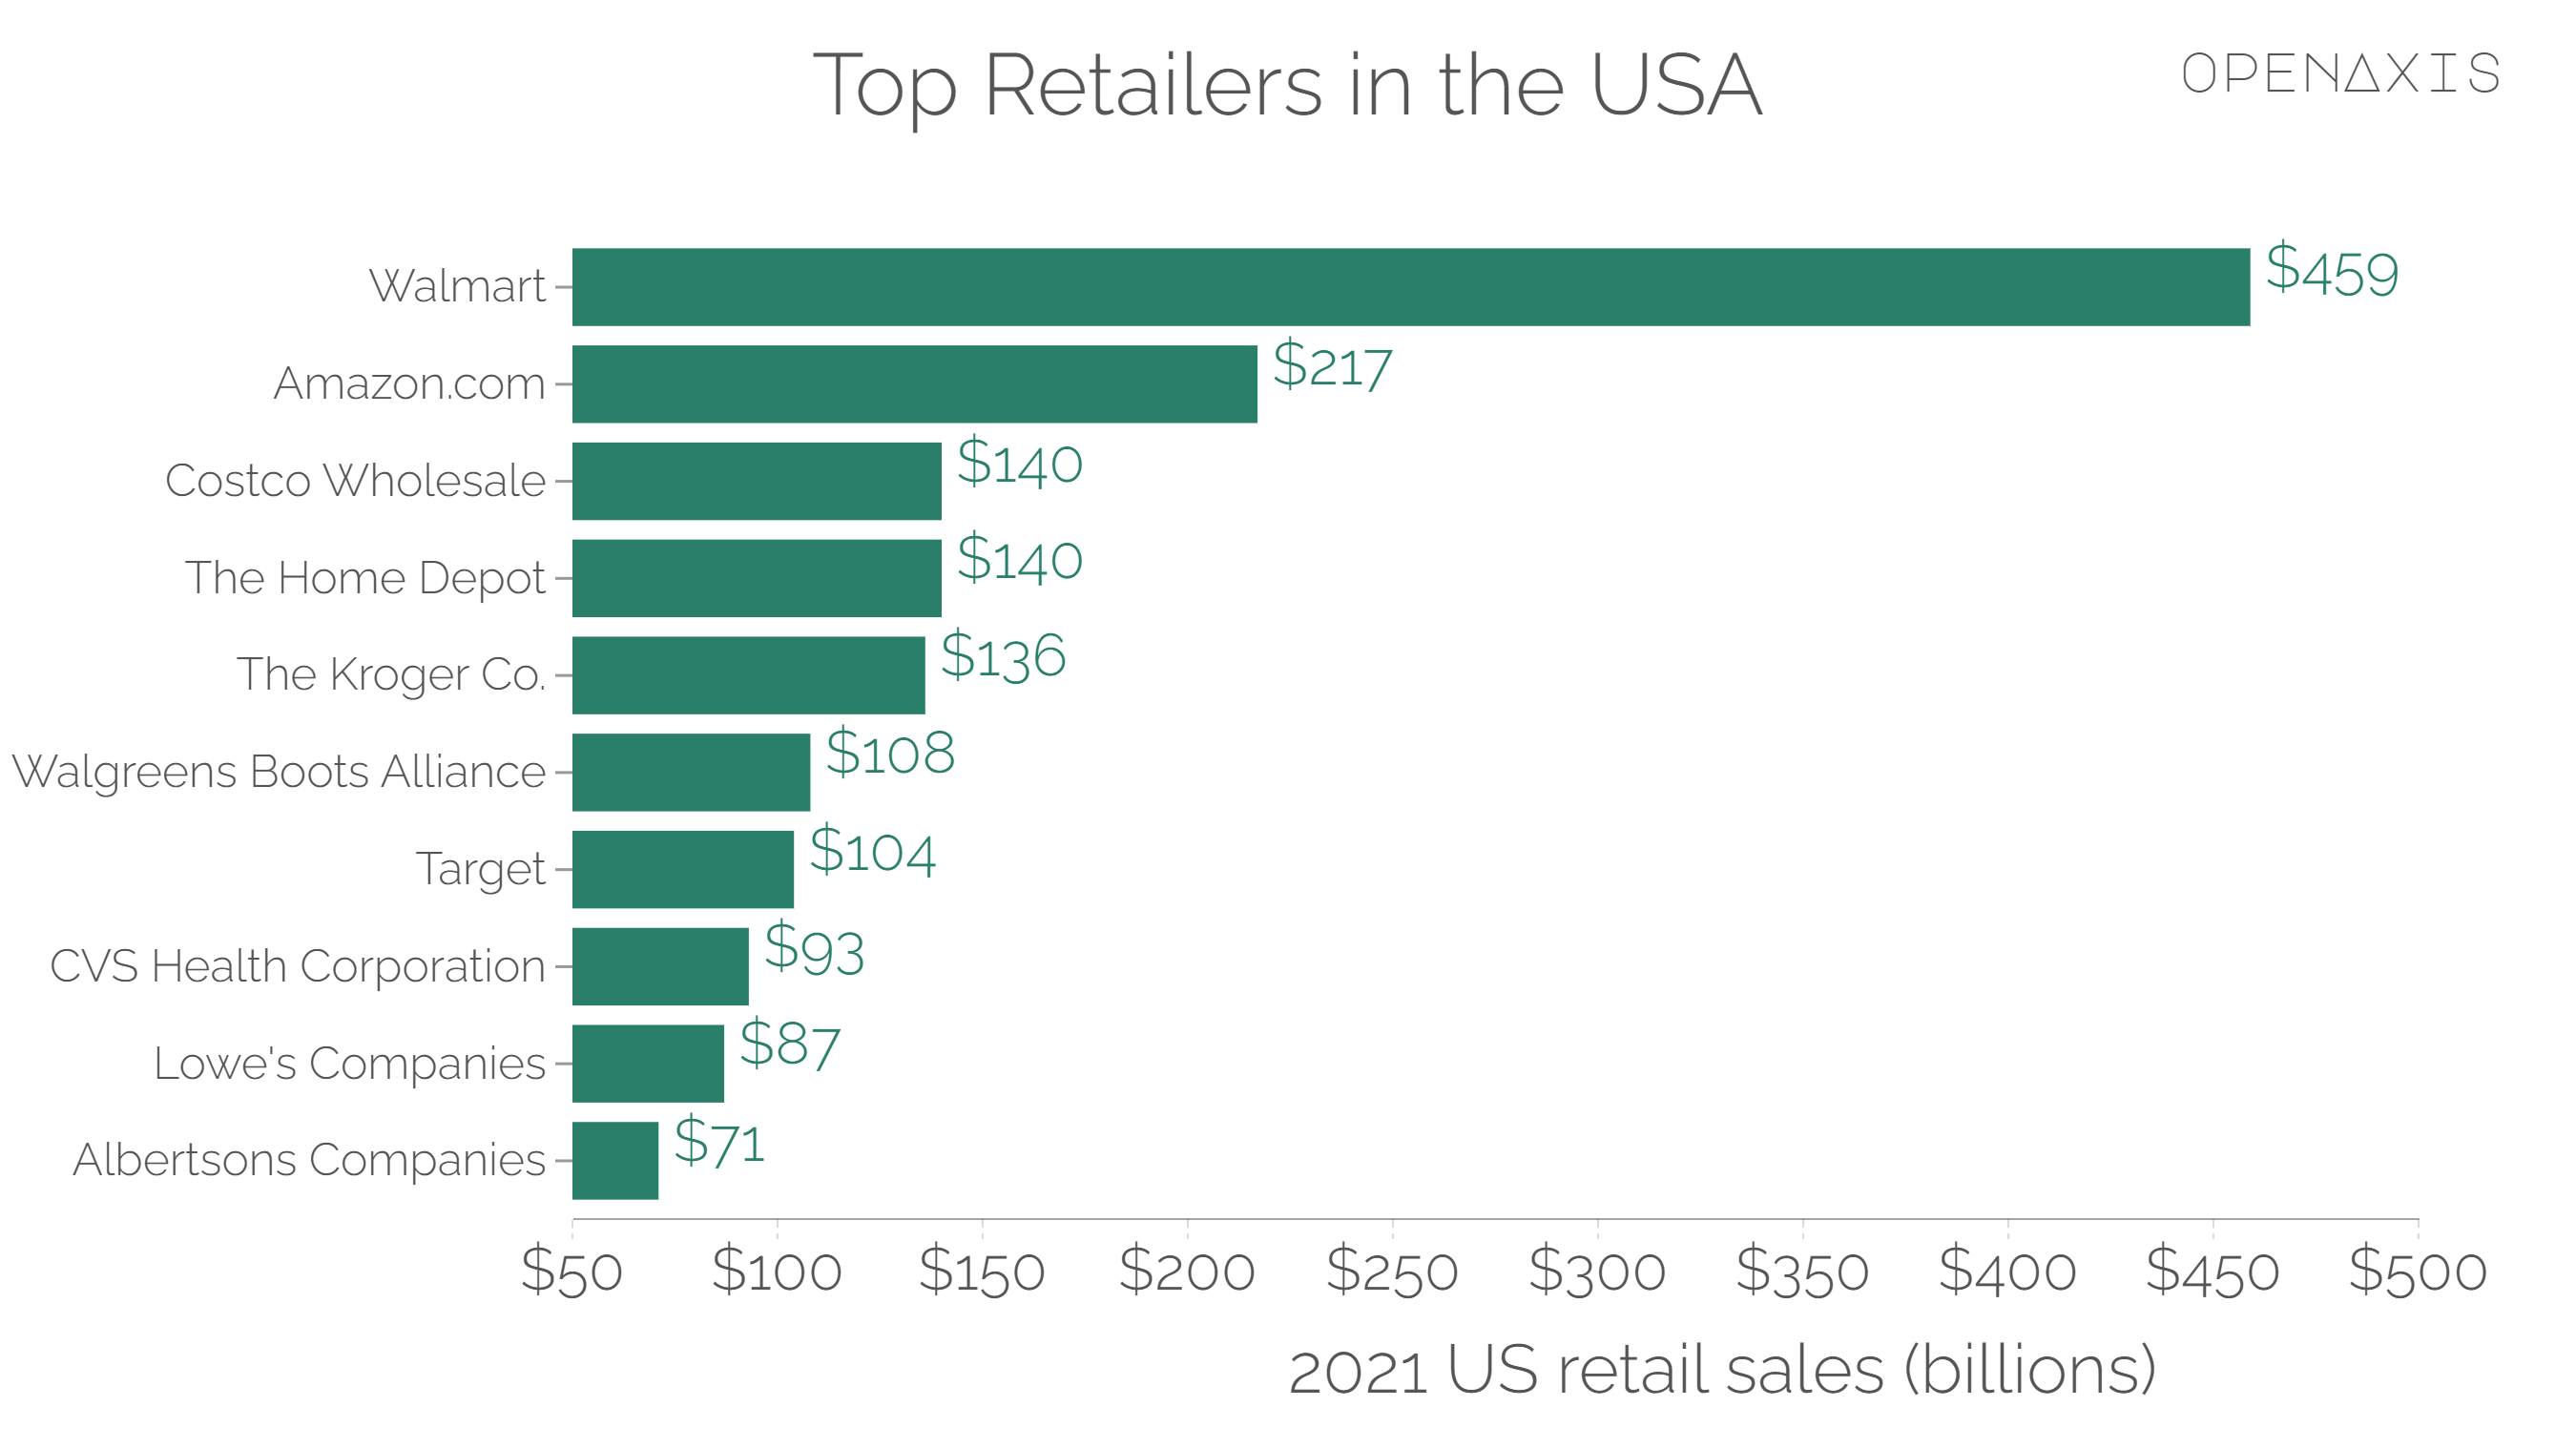 "Top Retailers in the USA"